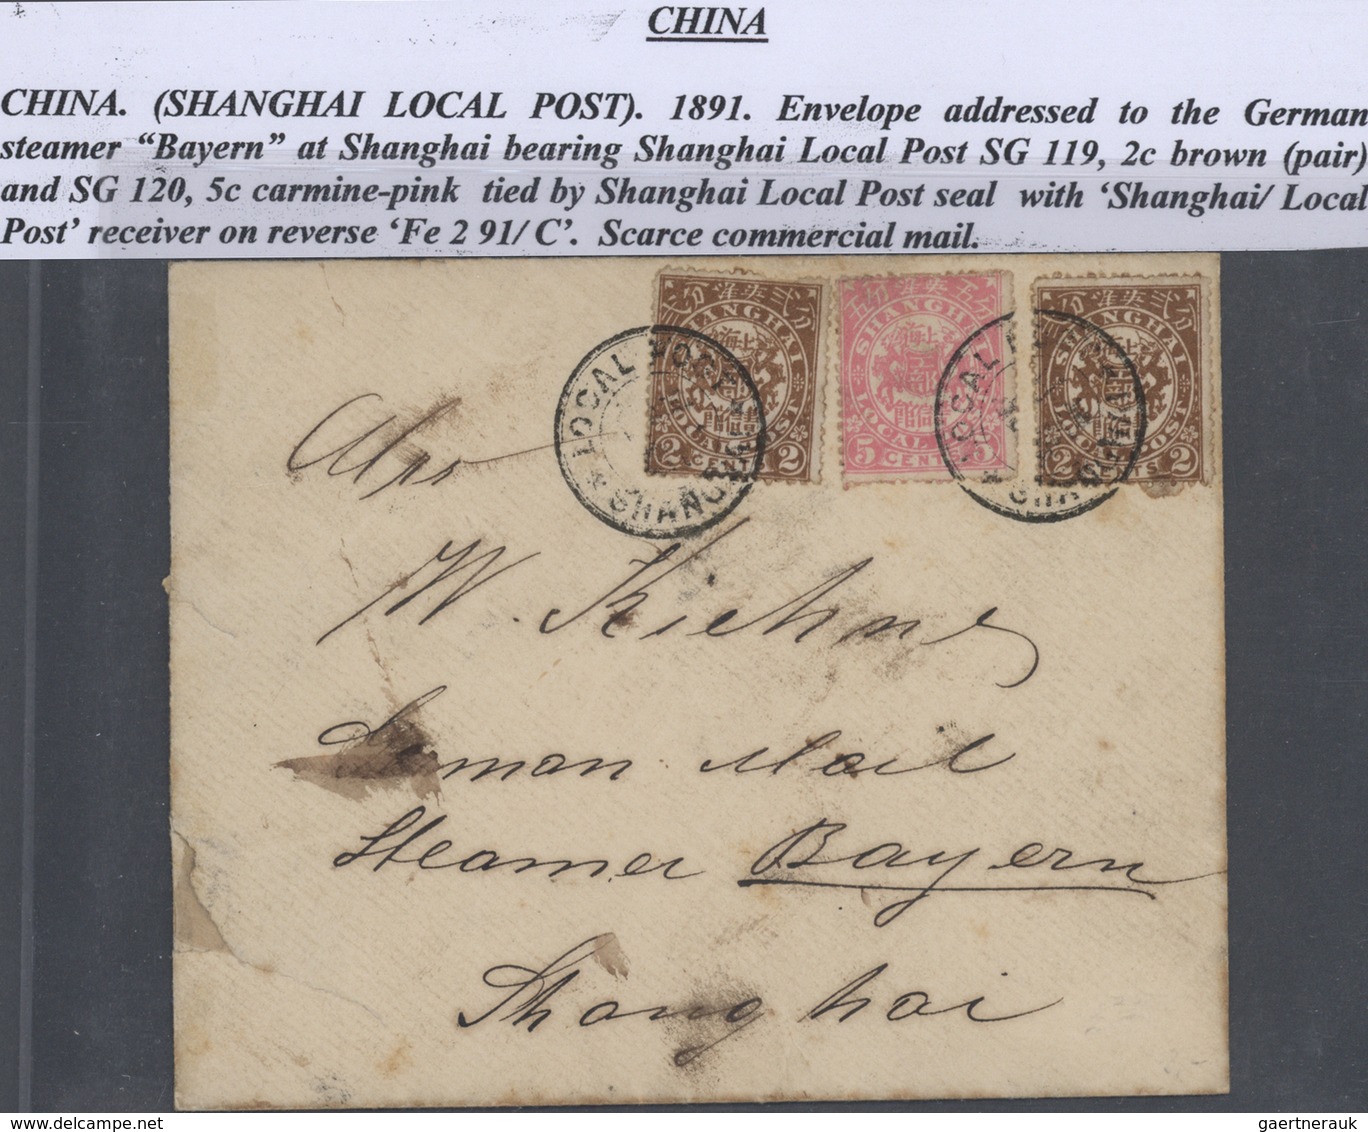 **/*/(*)/O/Br/GA China - Shanghai: 1865/97, the interesting detail study on a great array of subjects: small dragons